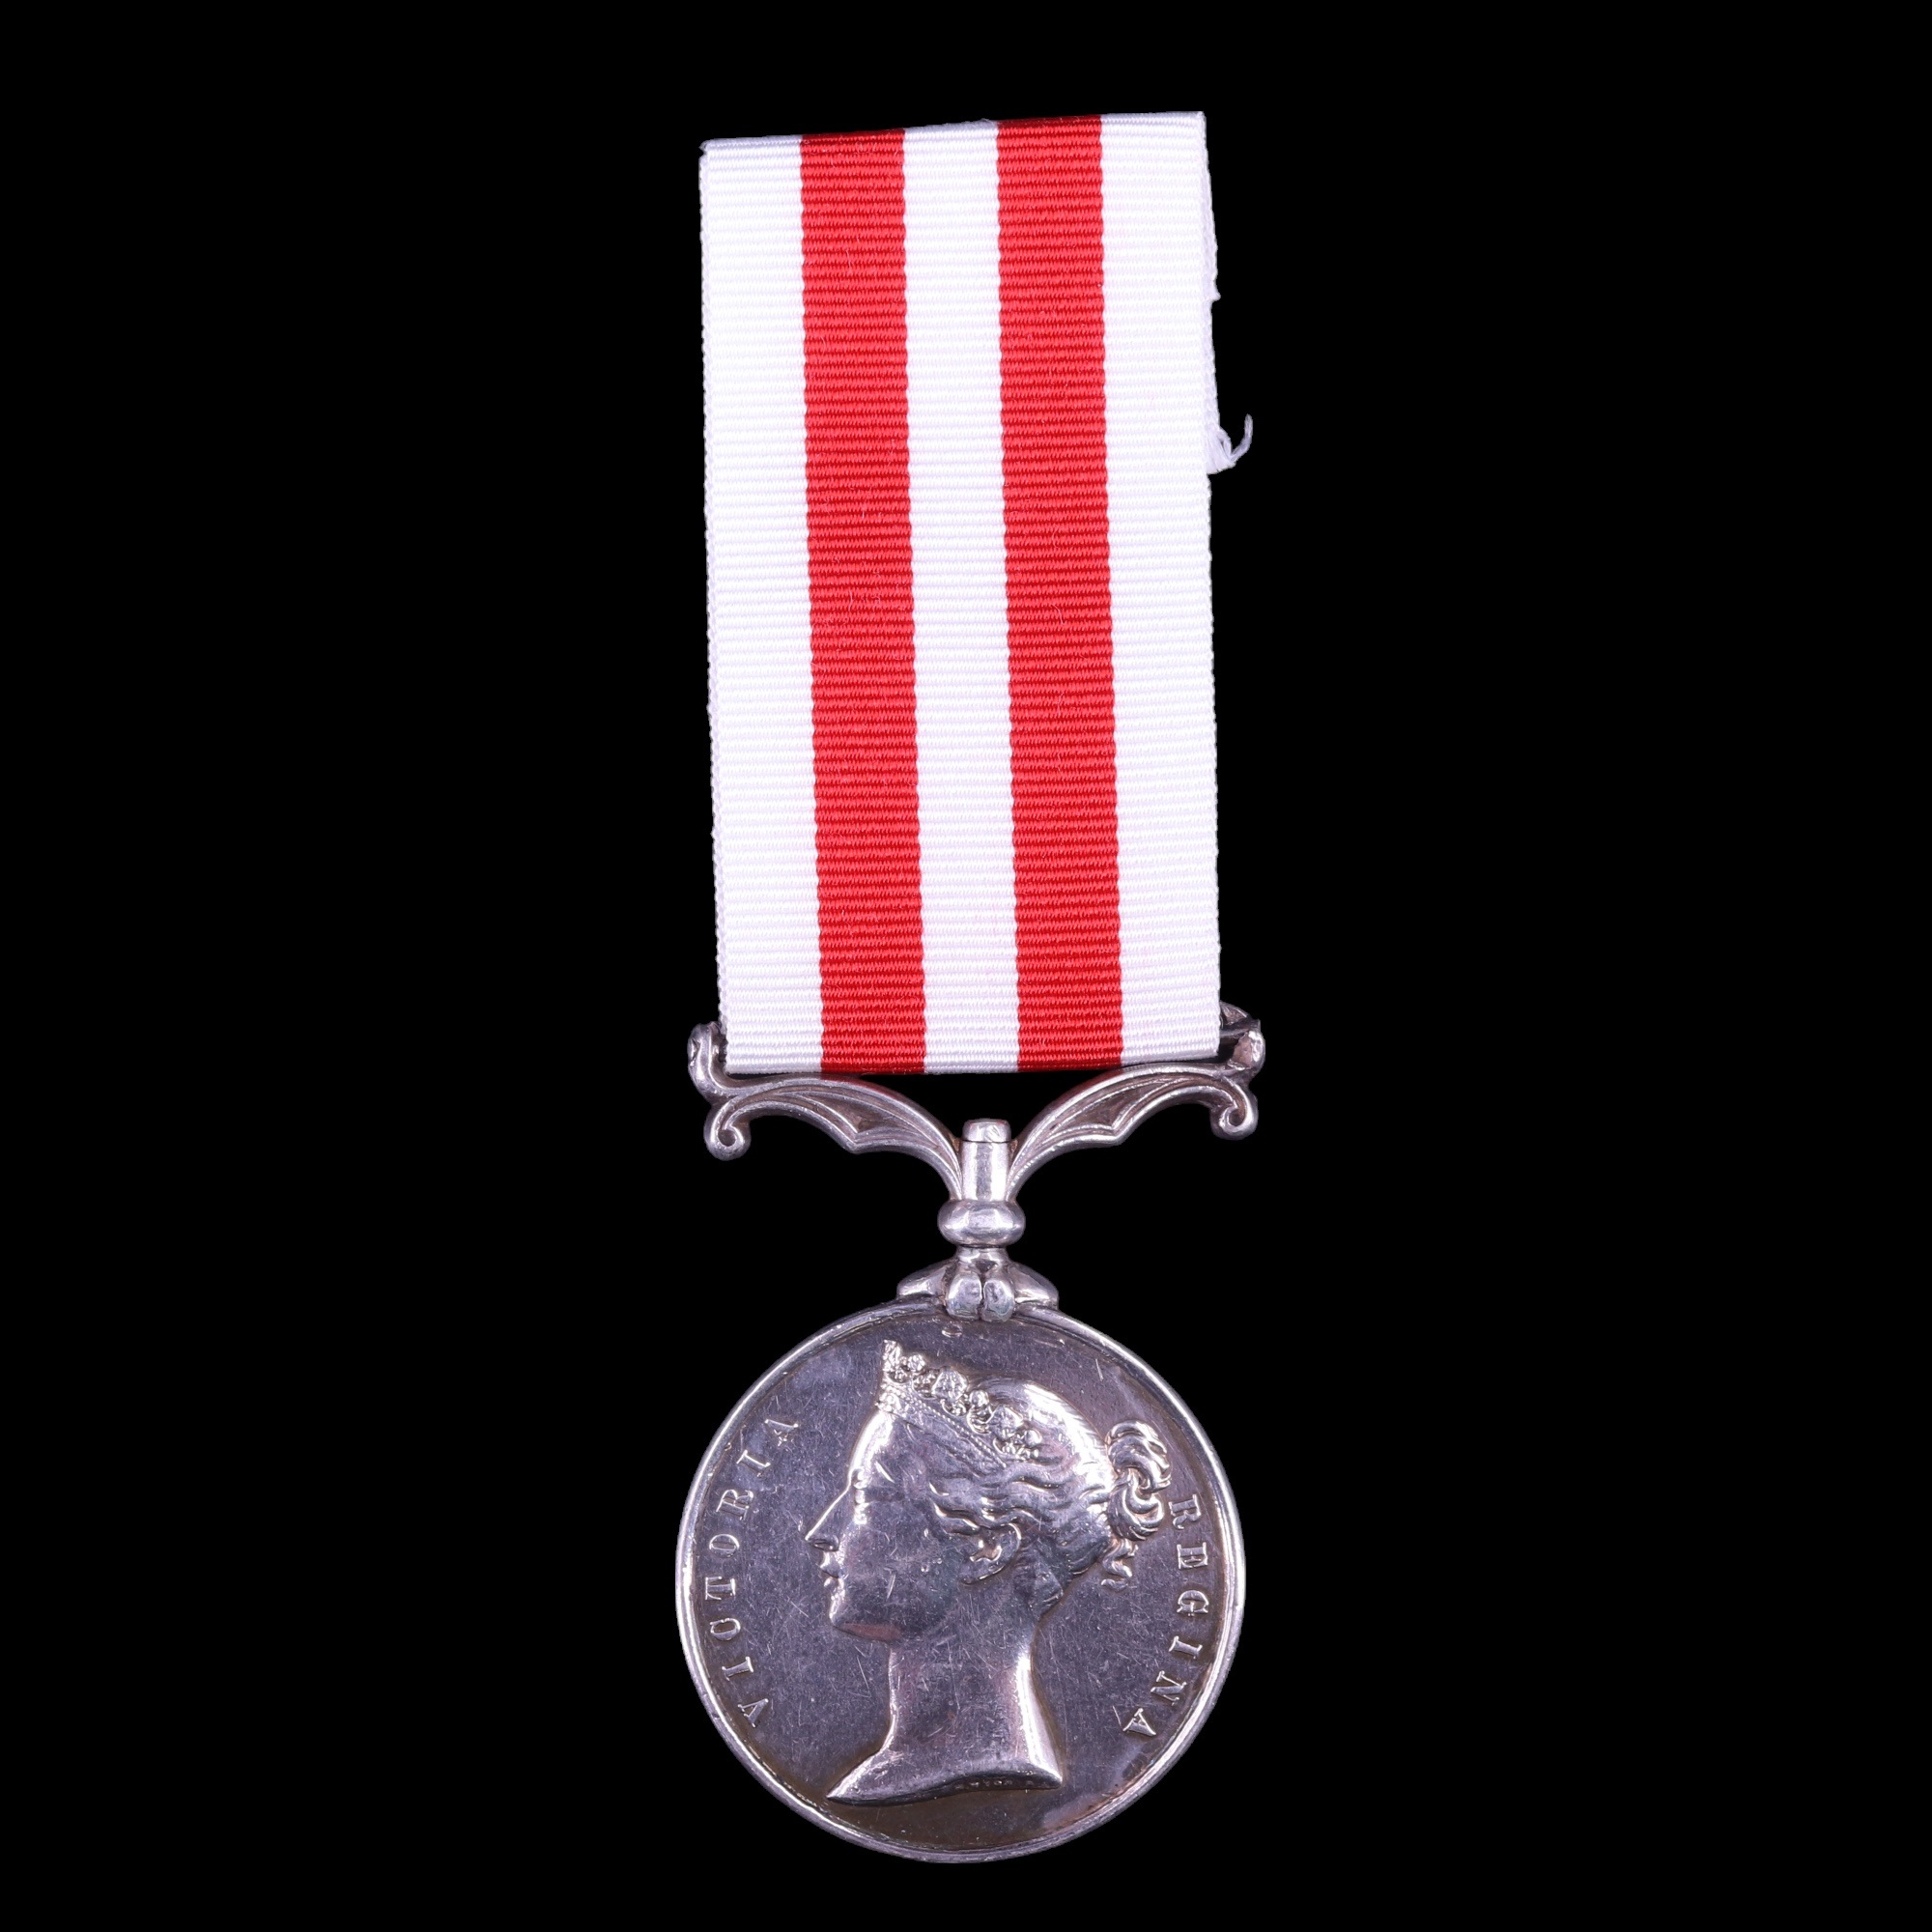 An Indian Mutiny Medal to Private George Lyon, 34th Regiment